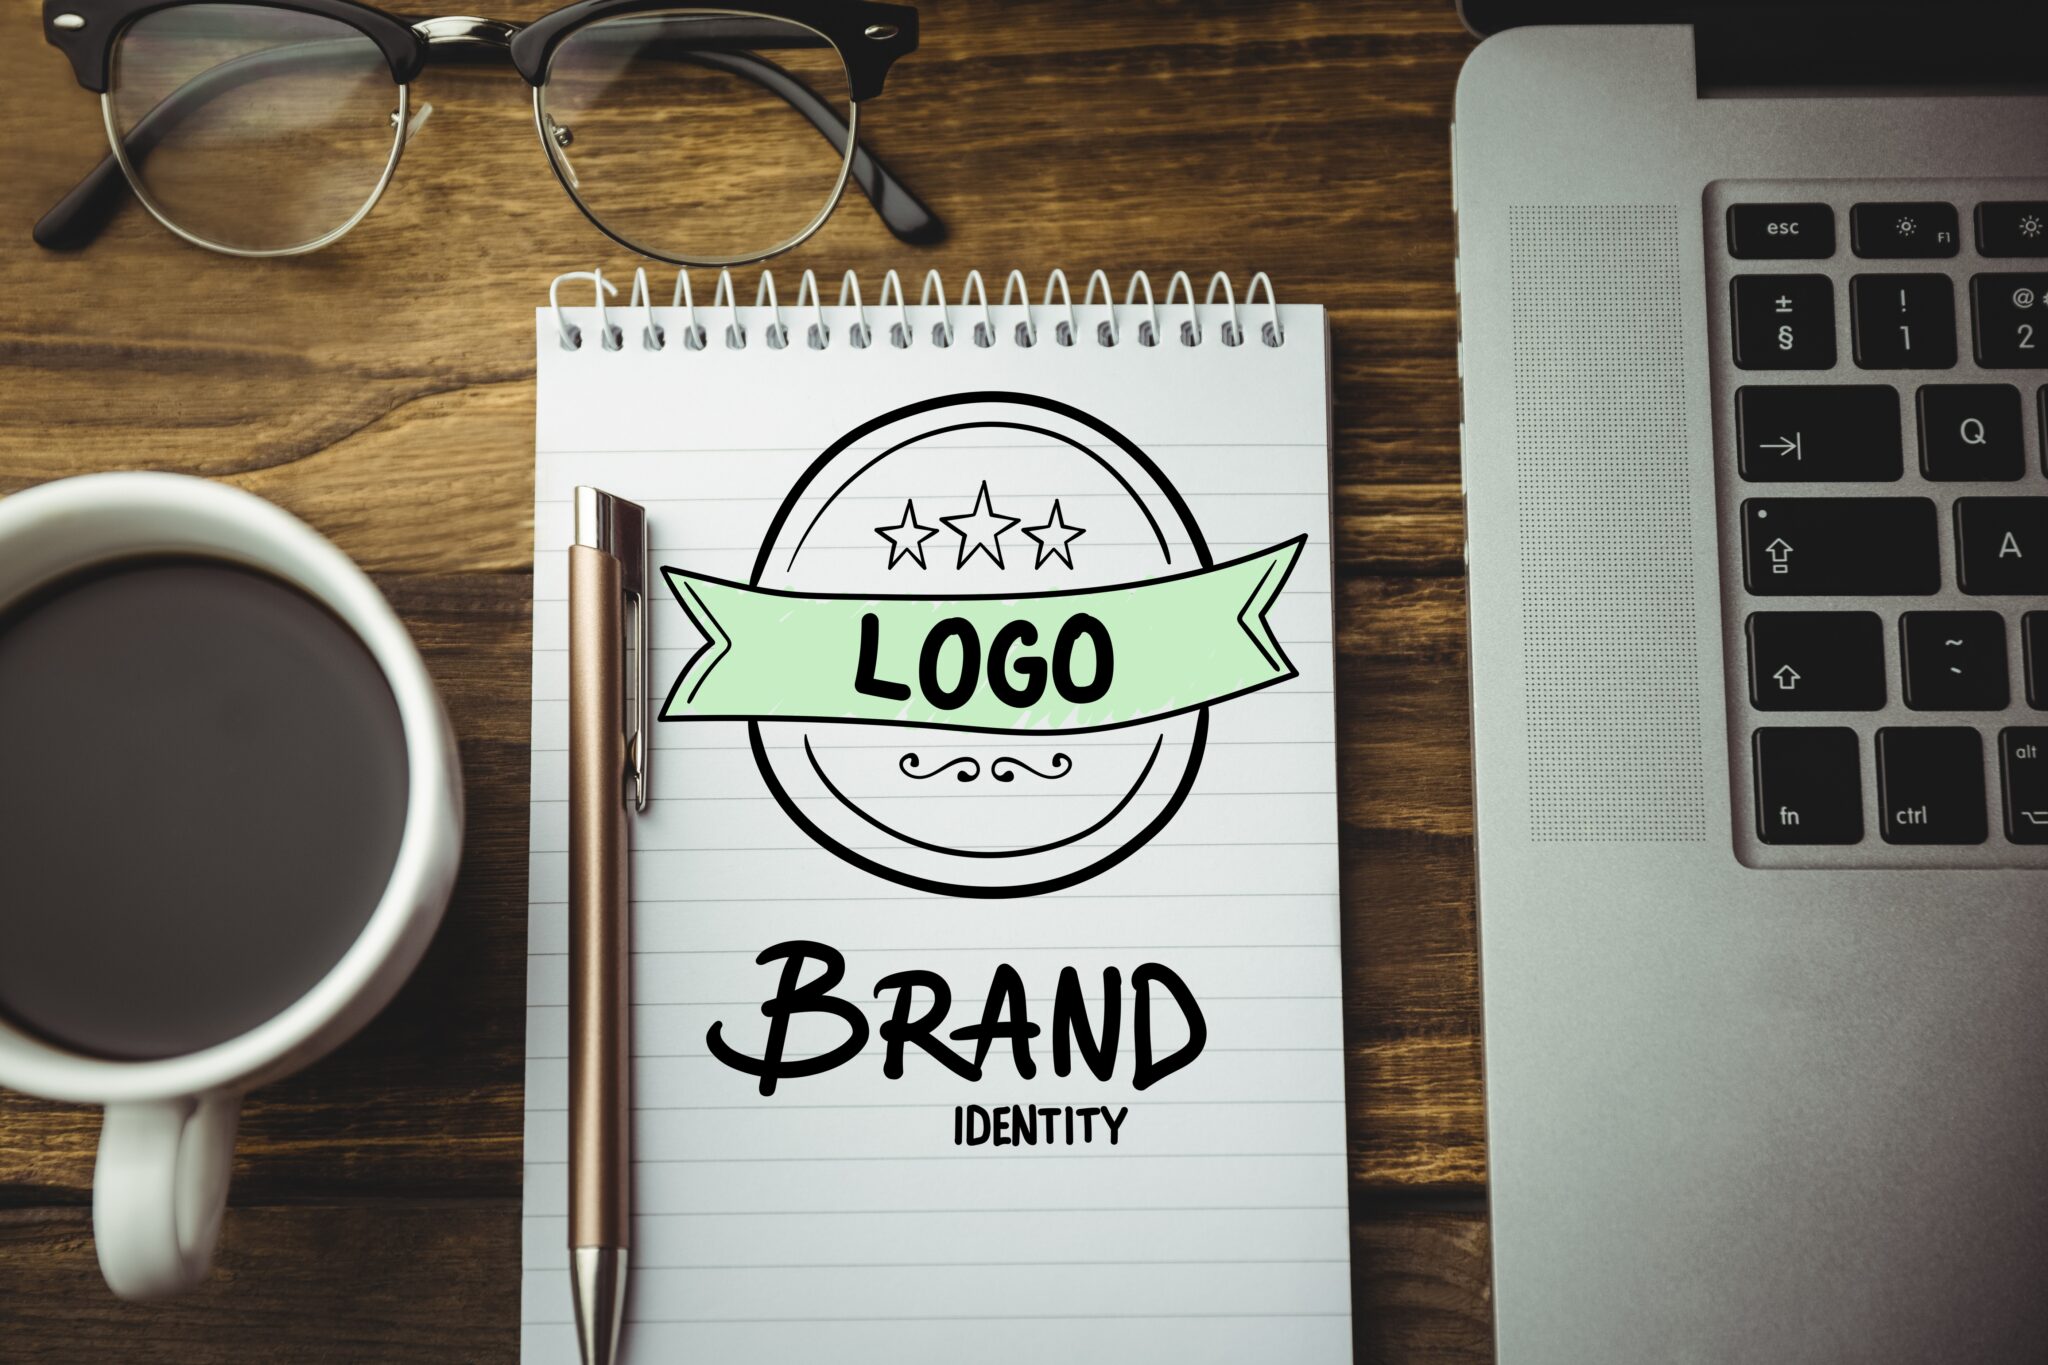 The One Thing You Must Get Right When Building a Brand: Interpreting Brand Identity